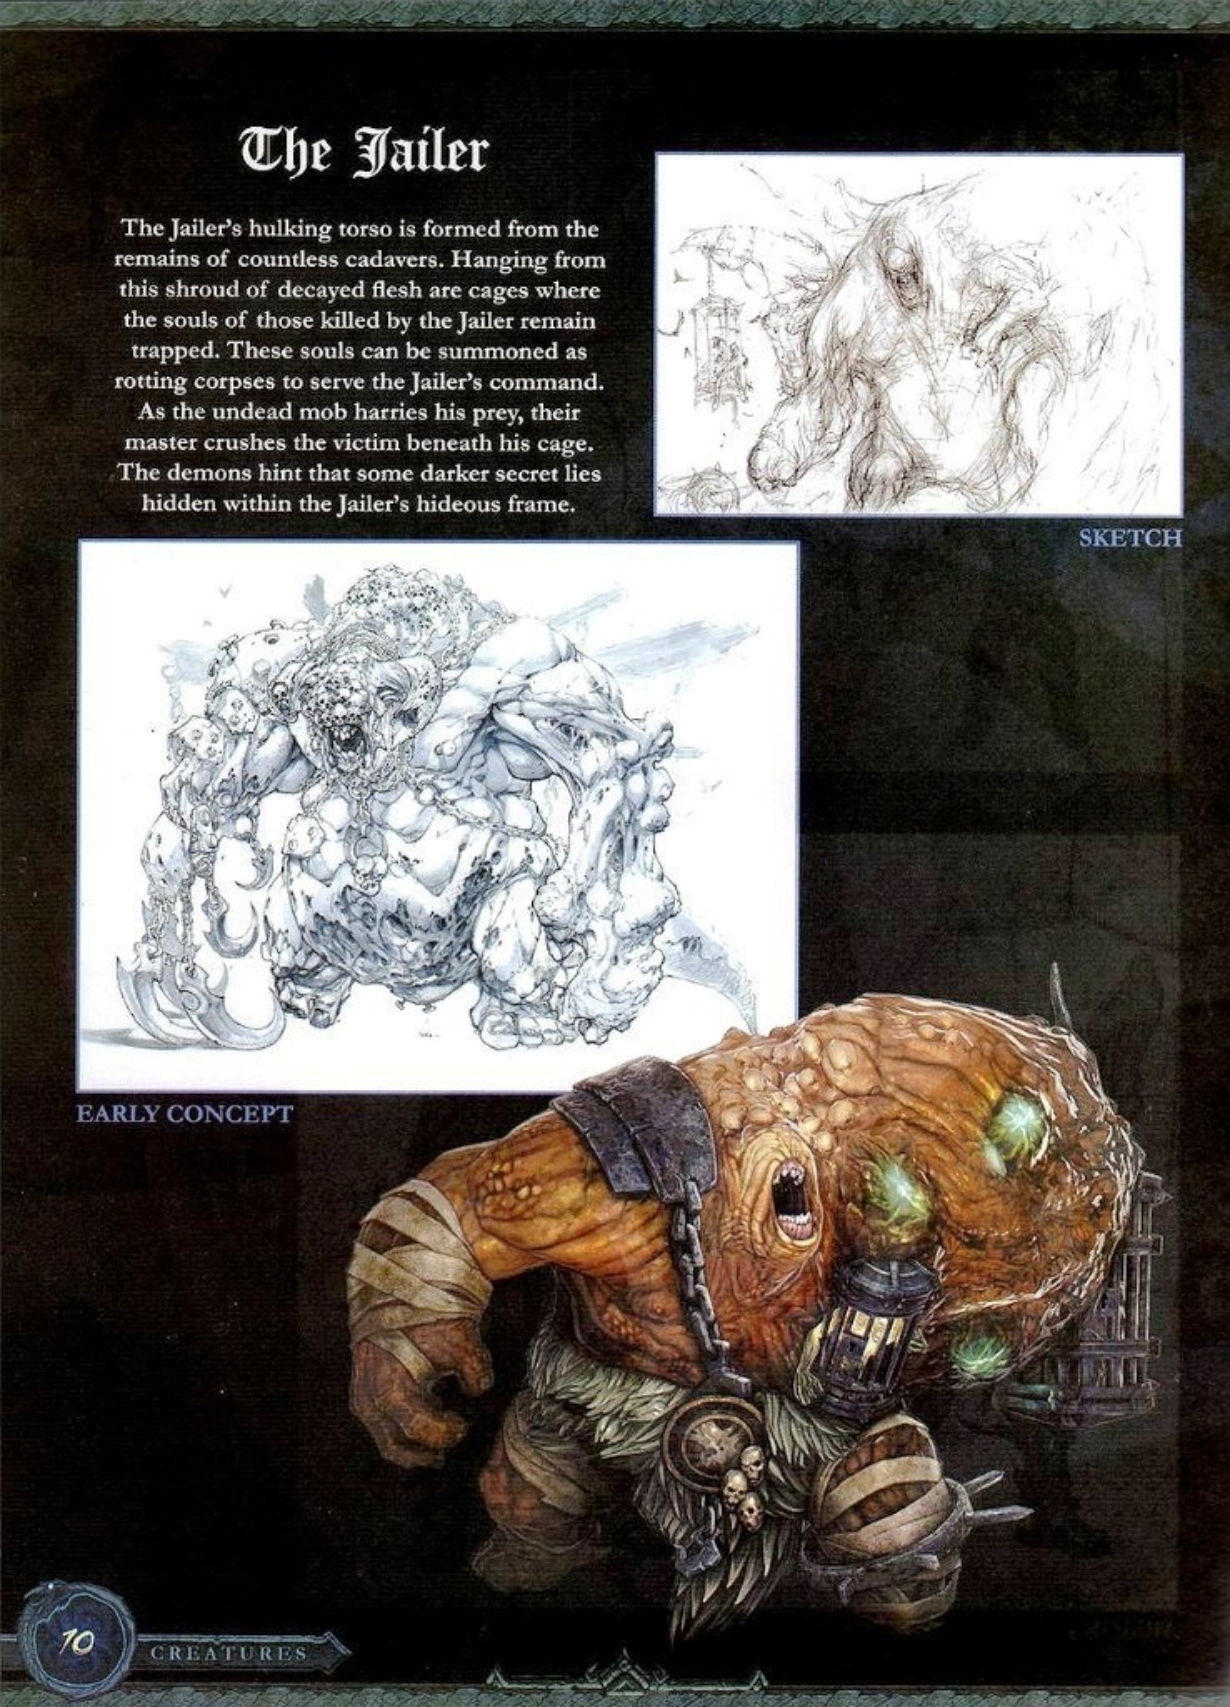 The Art of Darksiders (low-res, missing pages, and watermarked) 69